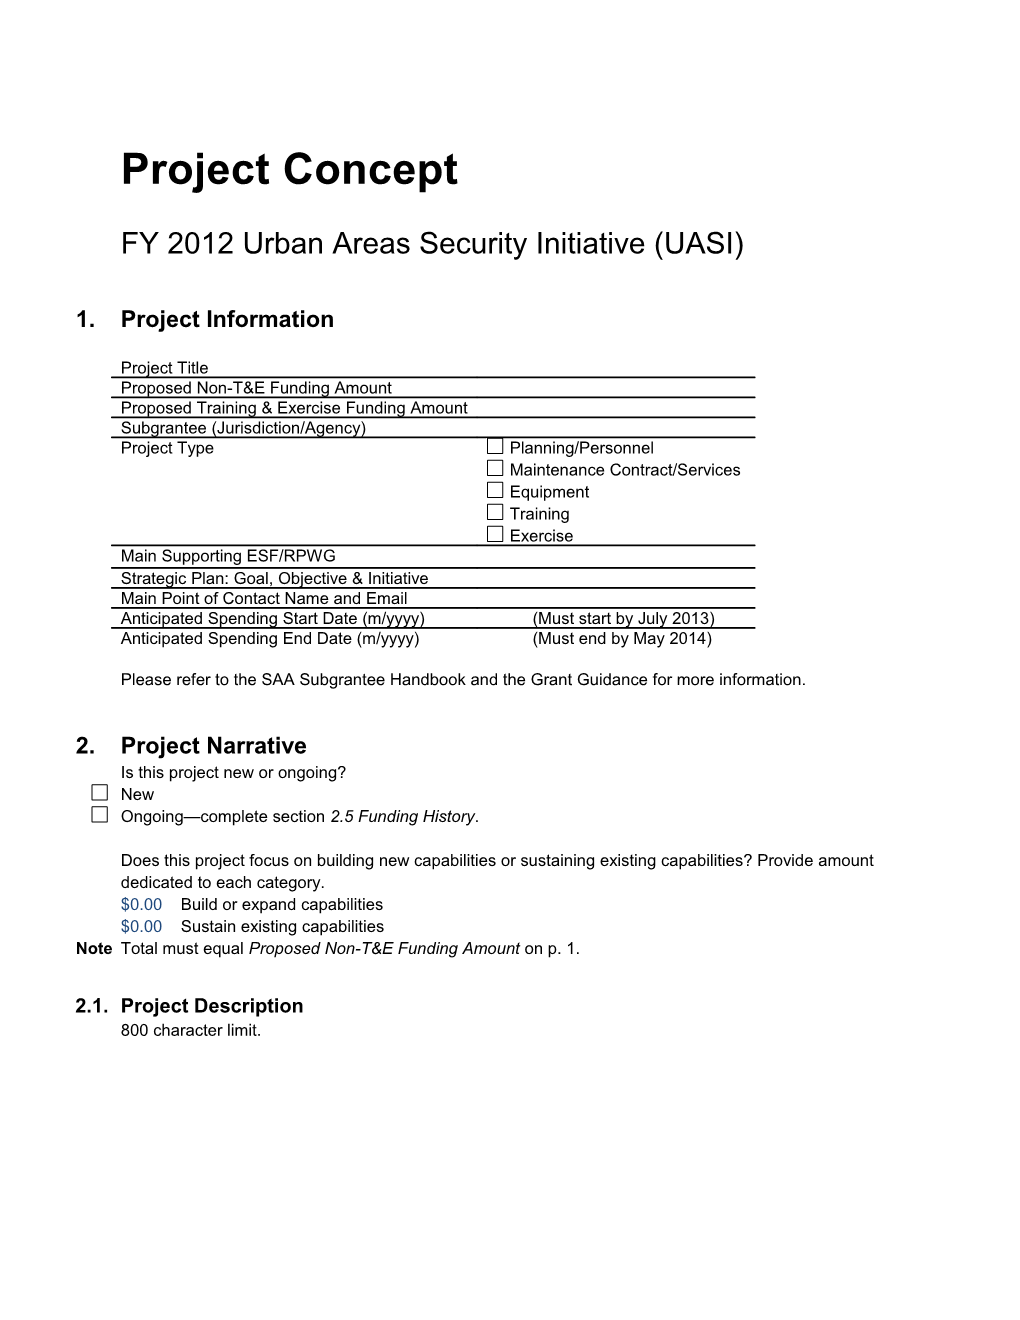 FY 2012 UASI Project Concept